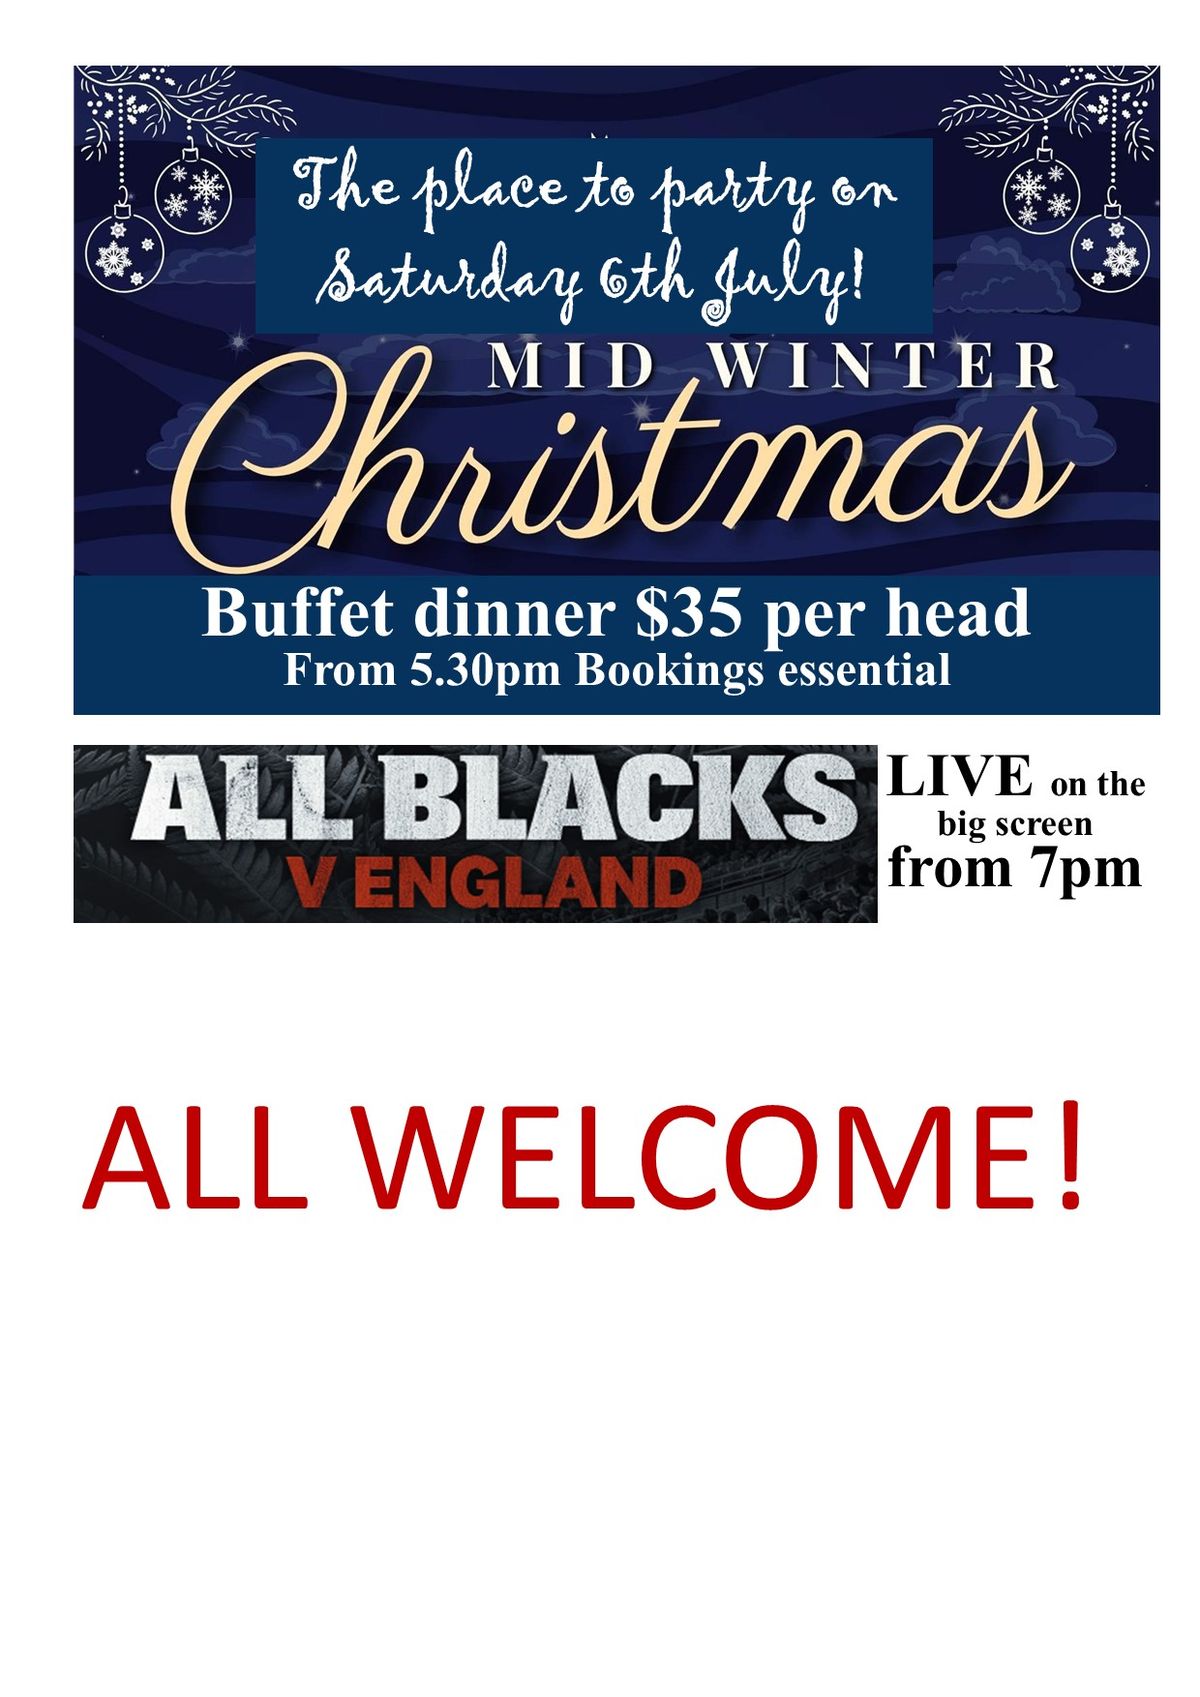 MID WINTER CHRISTMAS BUFFET - Non members welcome